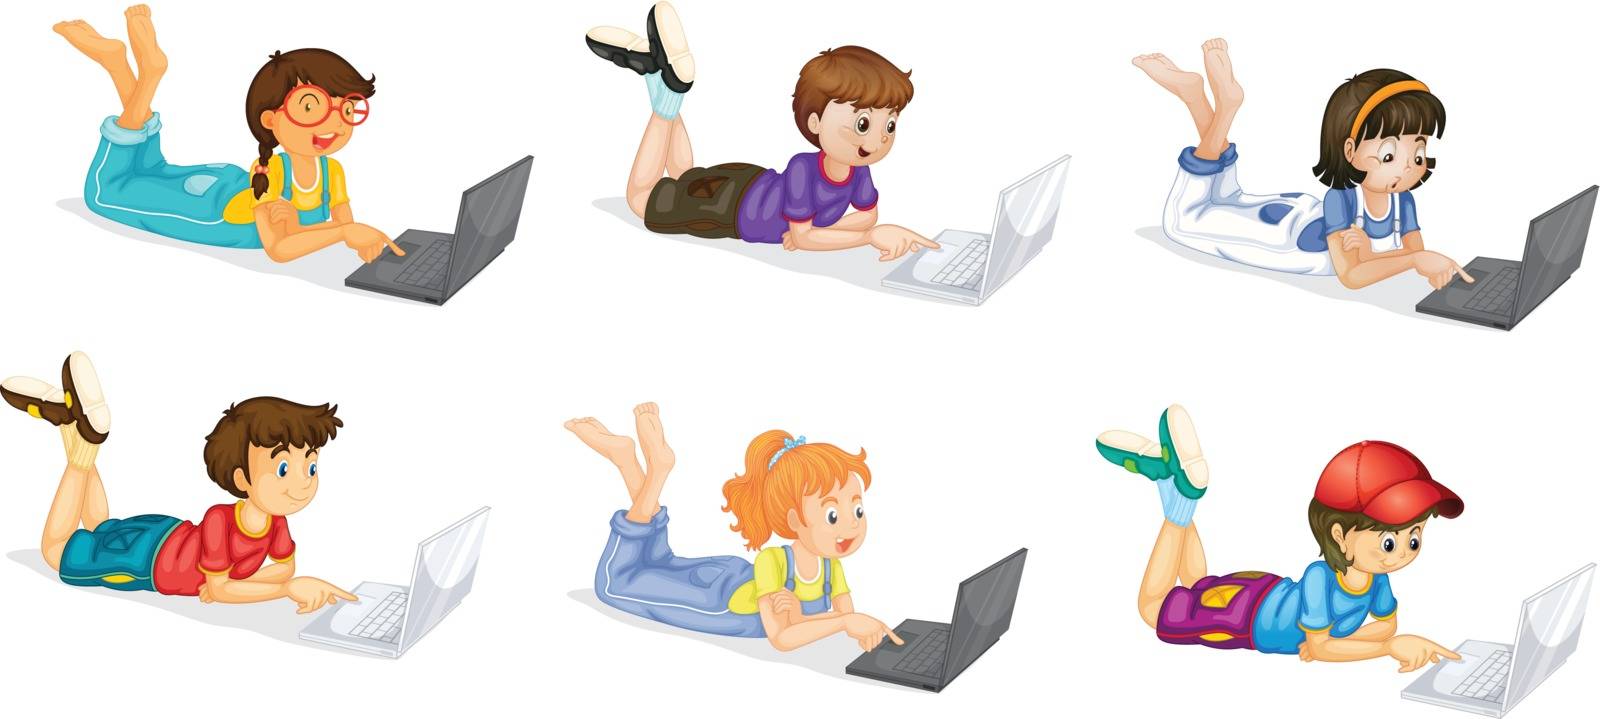 illustration of laptops and kids on a white background